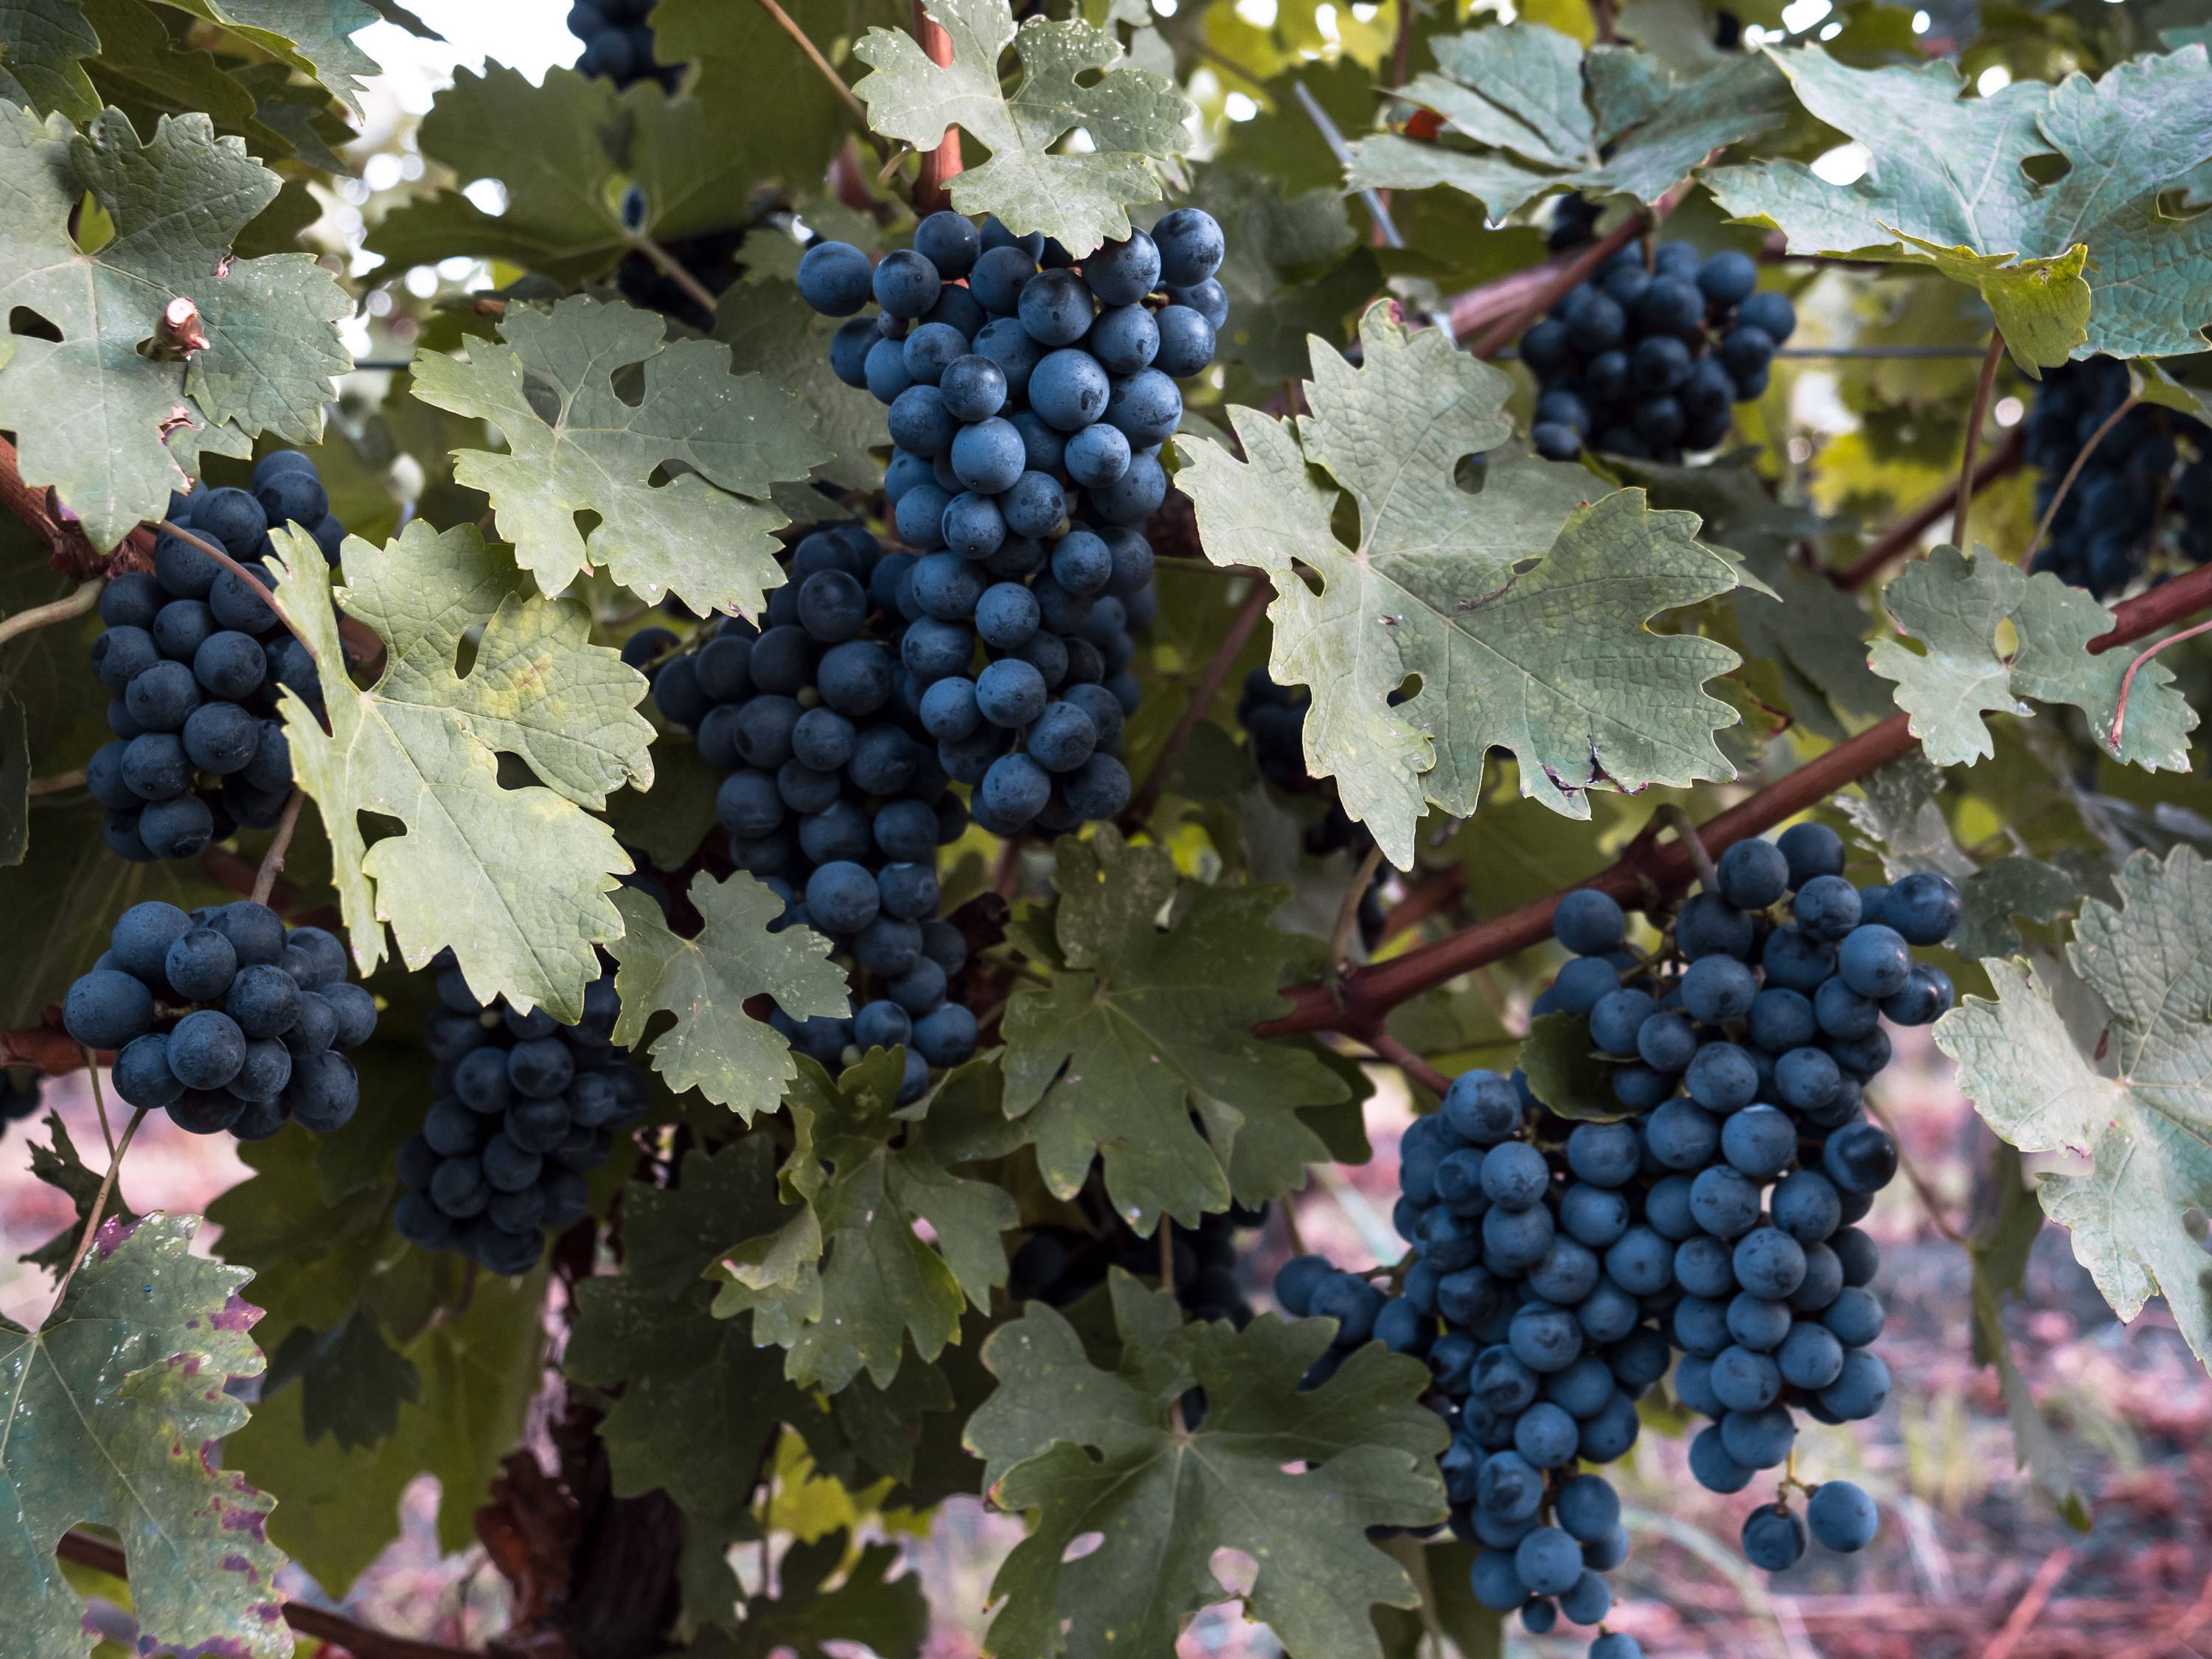 Dark cluster of grapes growing on a halthy vine. 